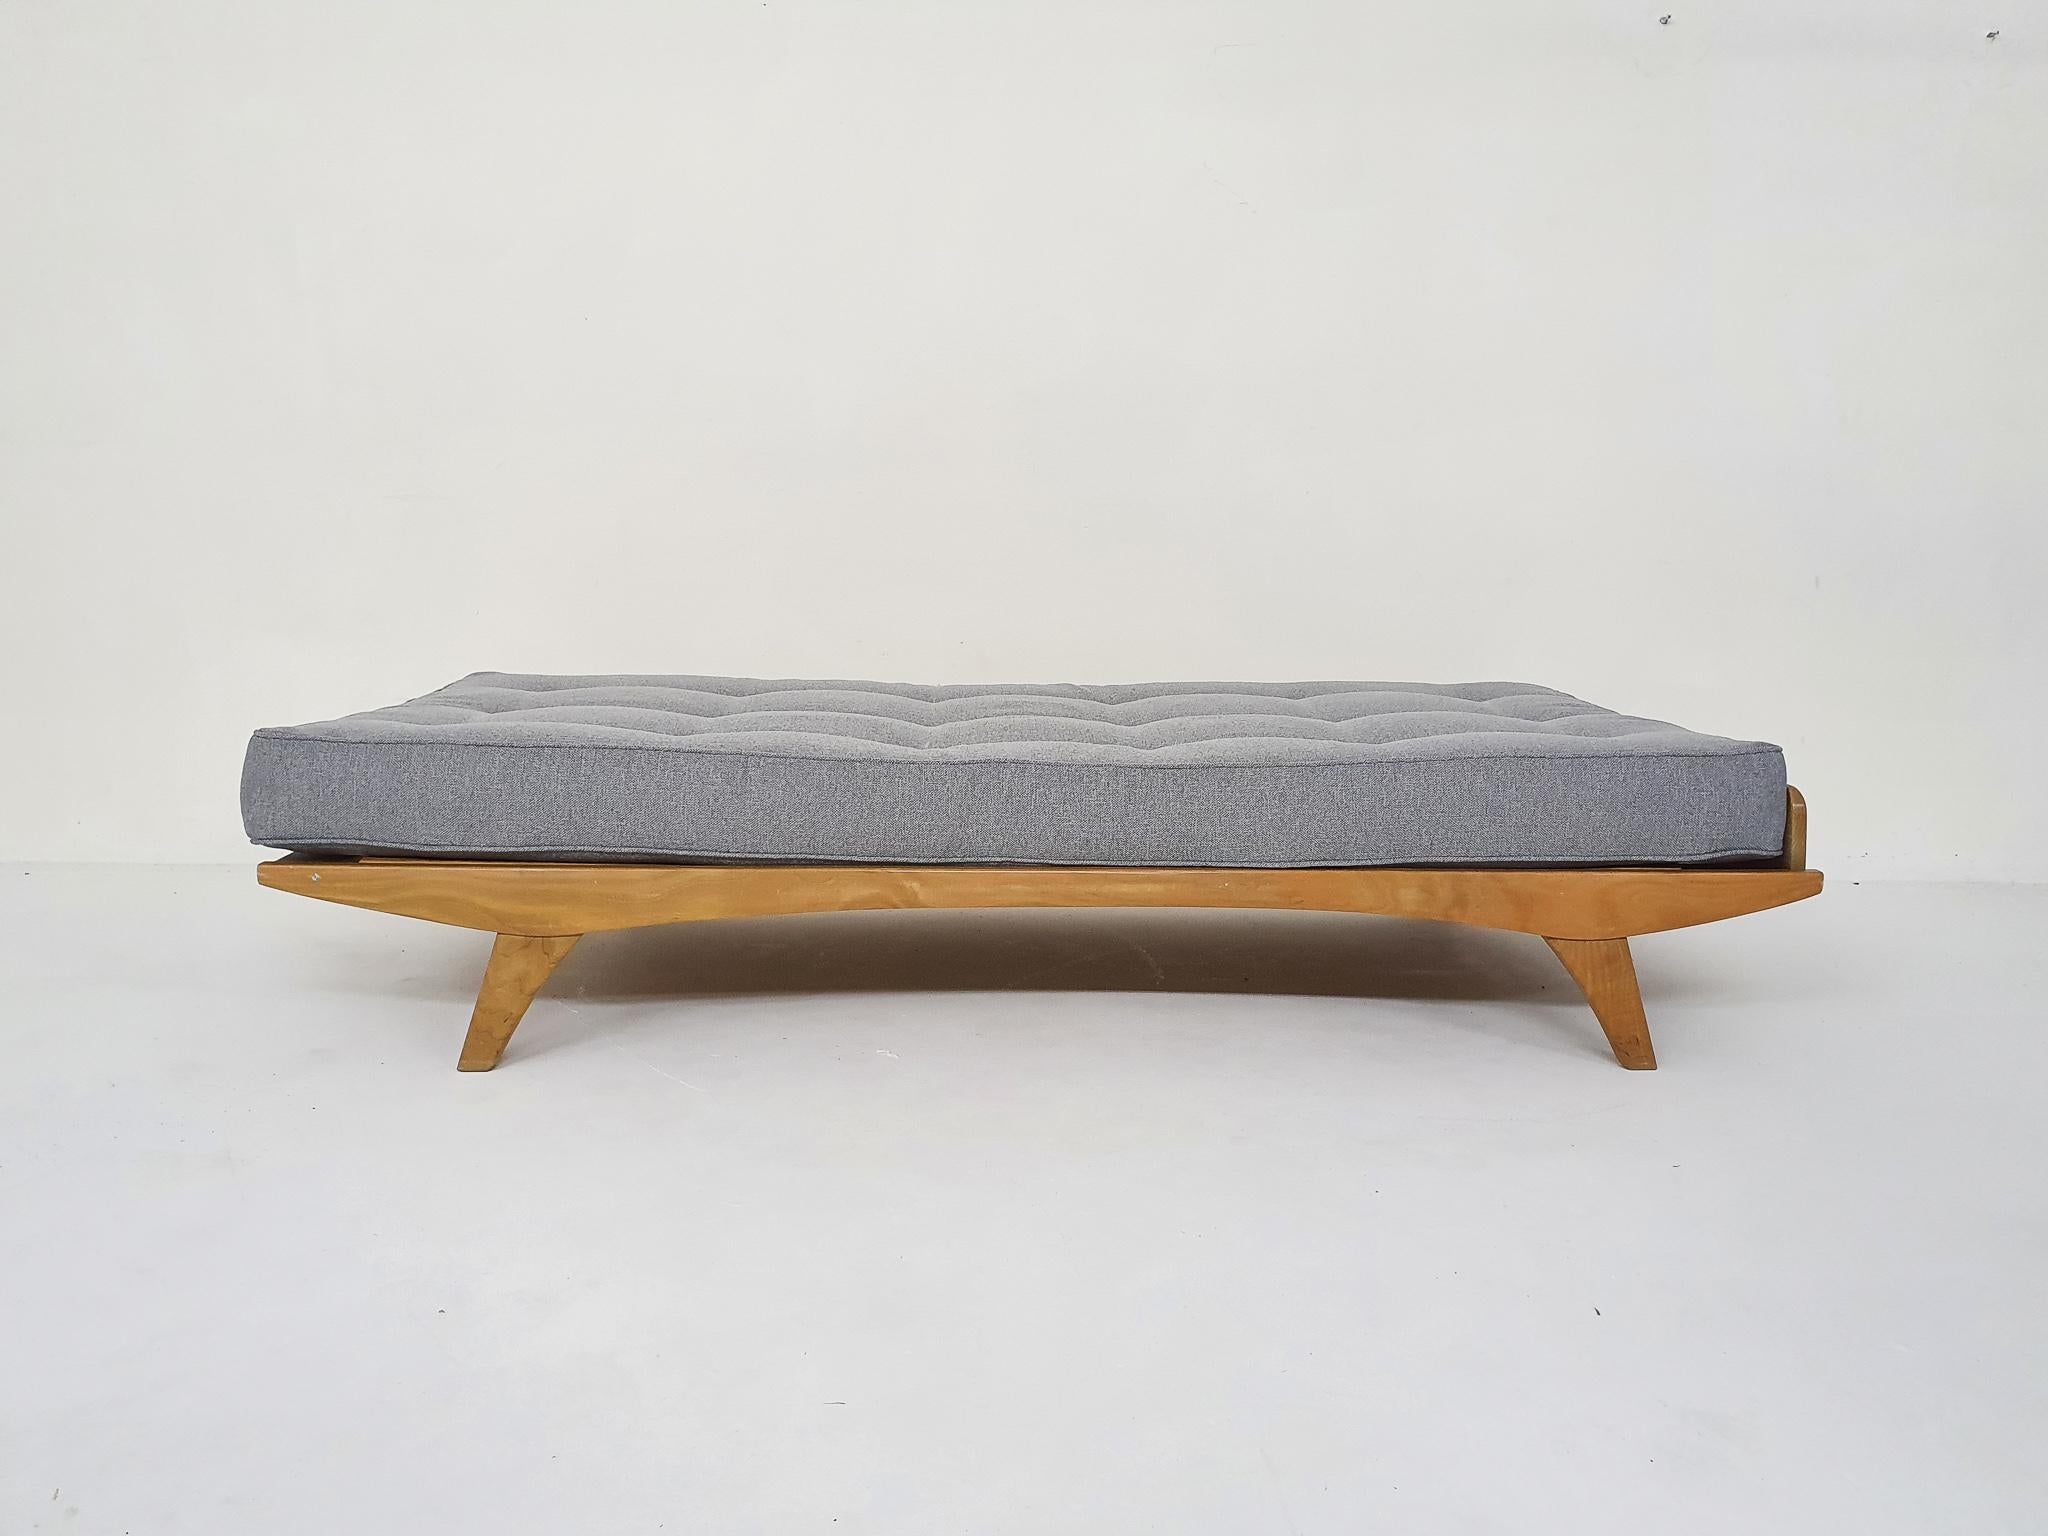 Ashwood daybed with a matress of 180 x 90 cm, re-upholstered in a grey fabric.
Marked at the bottom.